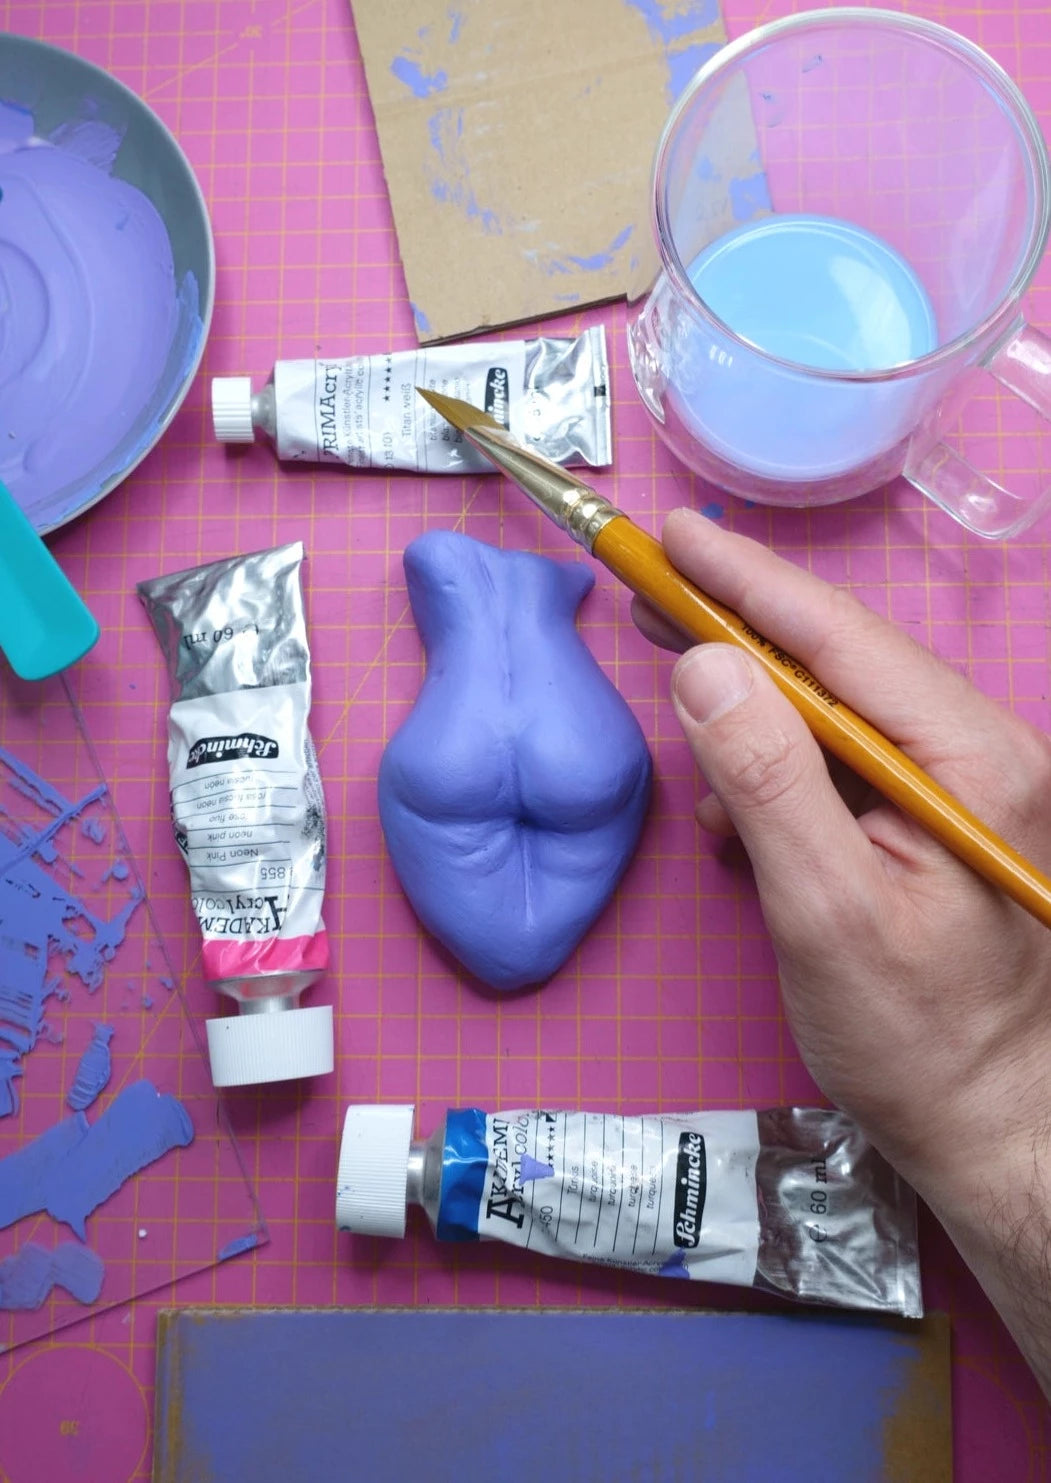 "Butt Sculptures - Painting Plaster Figurines" Workshop - in Cologne, Germany